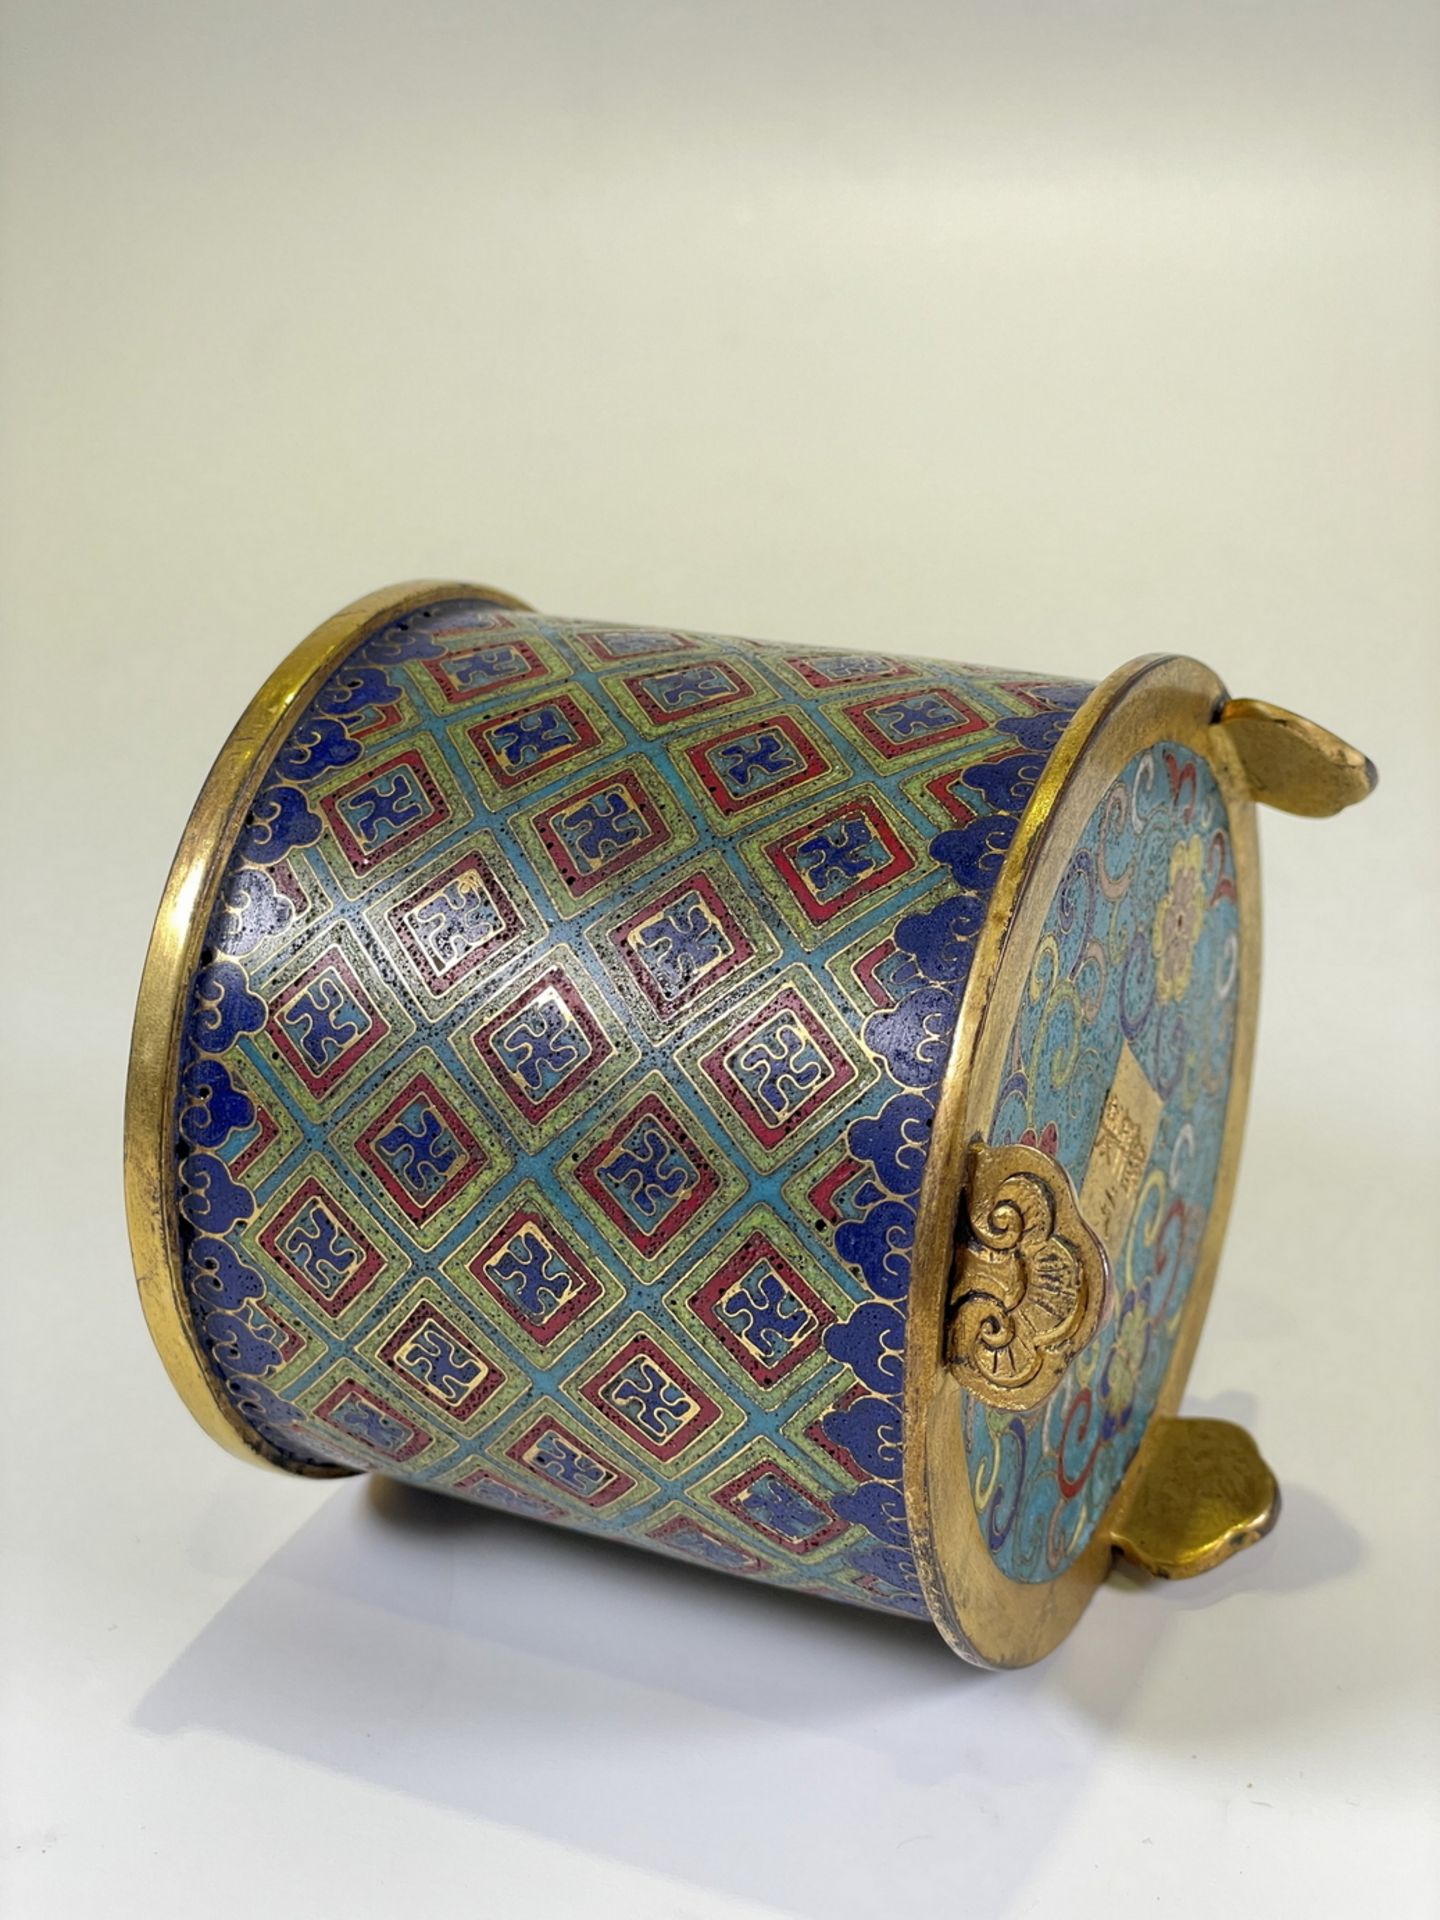 FINE CHINESE CLOISONNE, 18TH/19TH Century Pr. Collection of NARA private gallary.  - Image 5 of 11